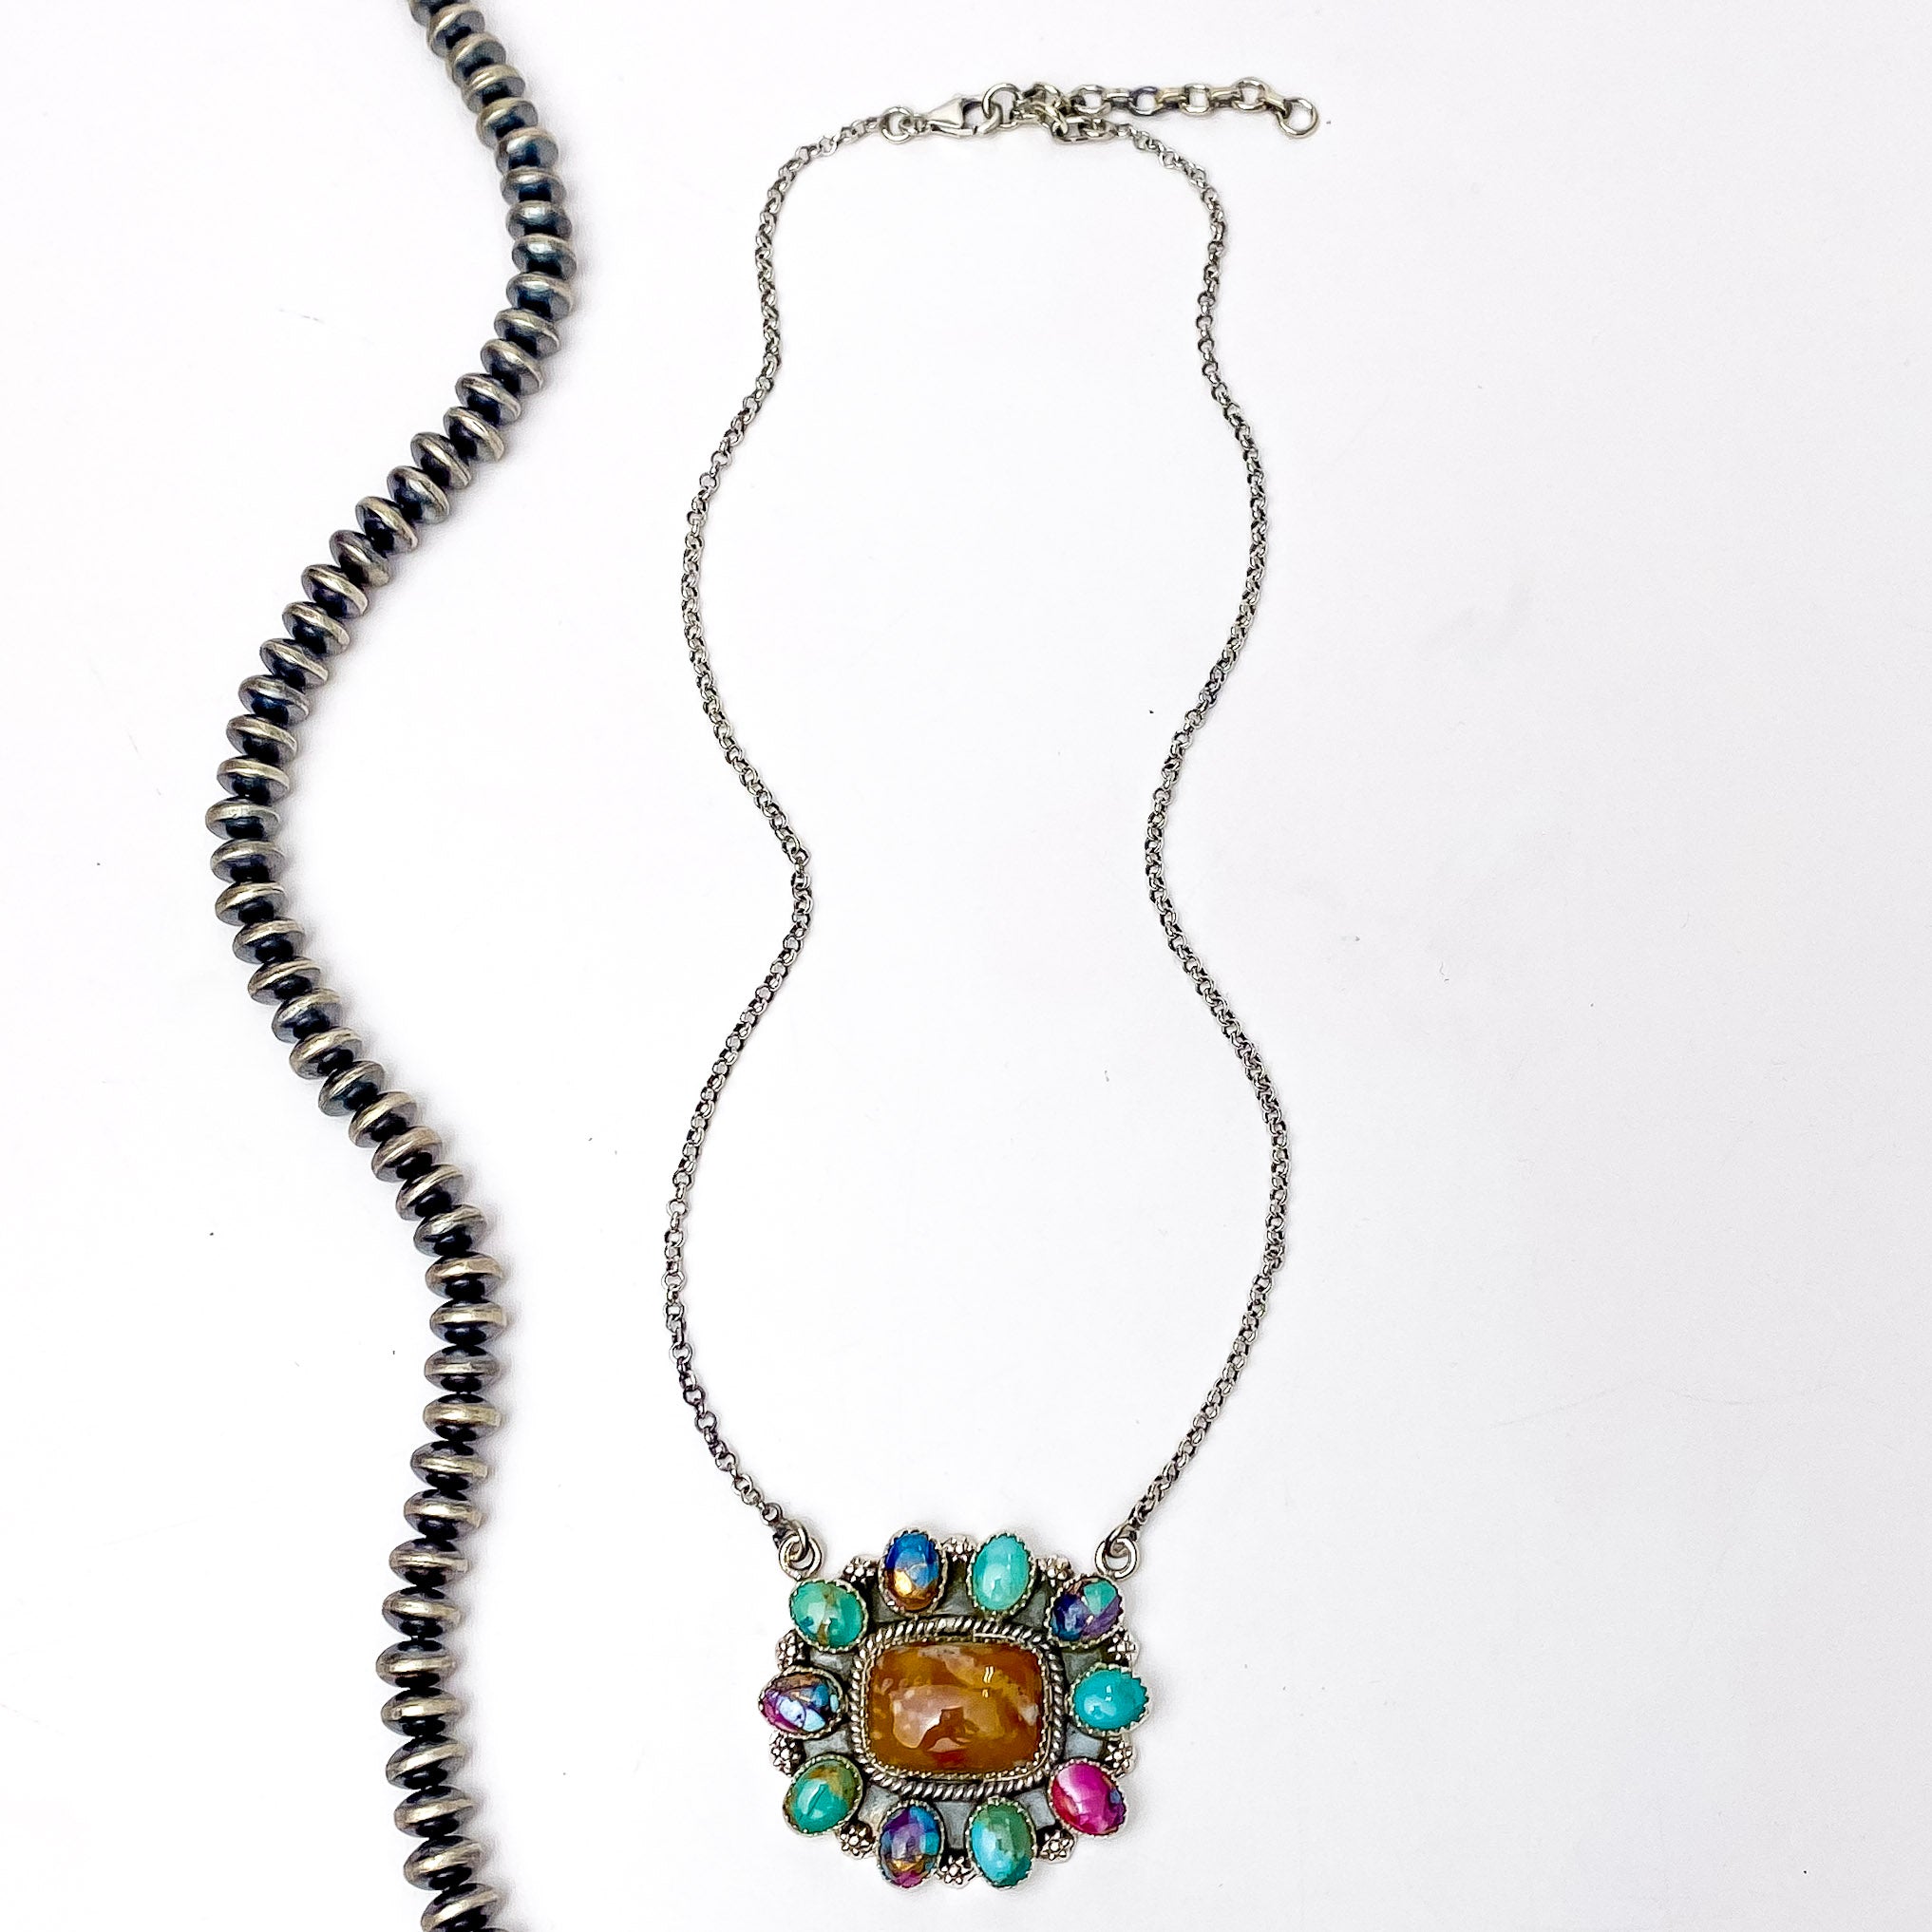 Hada Collection | Handmade Sterling Silver Necklace with Multi Stone Remix Cluster Pendant - Giddy Up Glamour Boutique